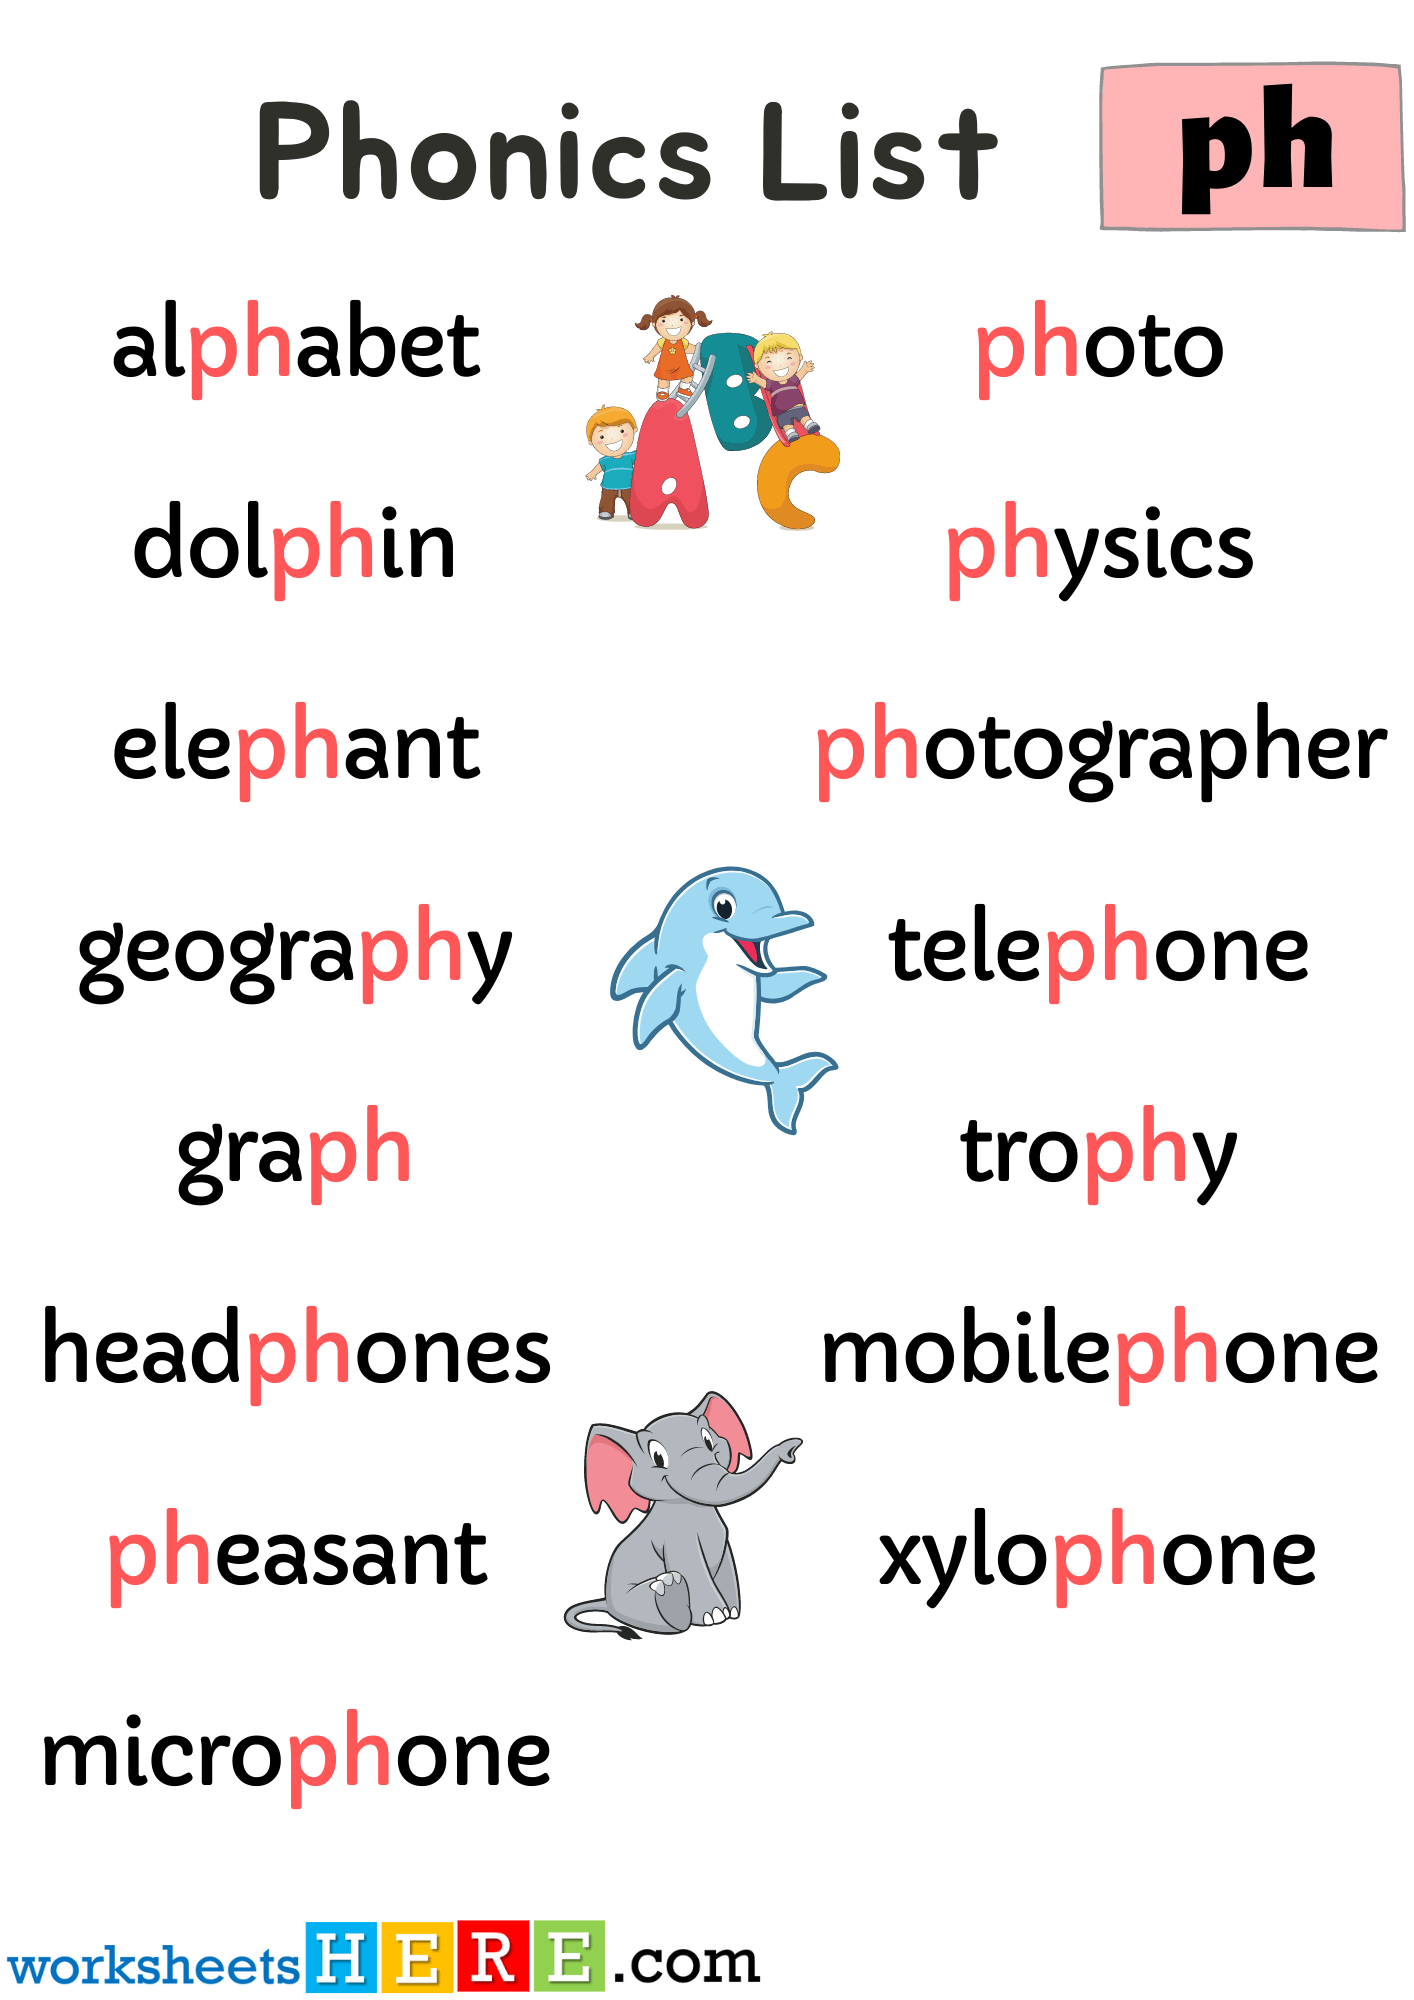 Spelling Phonics ‘ph’ Sounds PDF Worksheet For Kids and Students